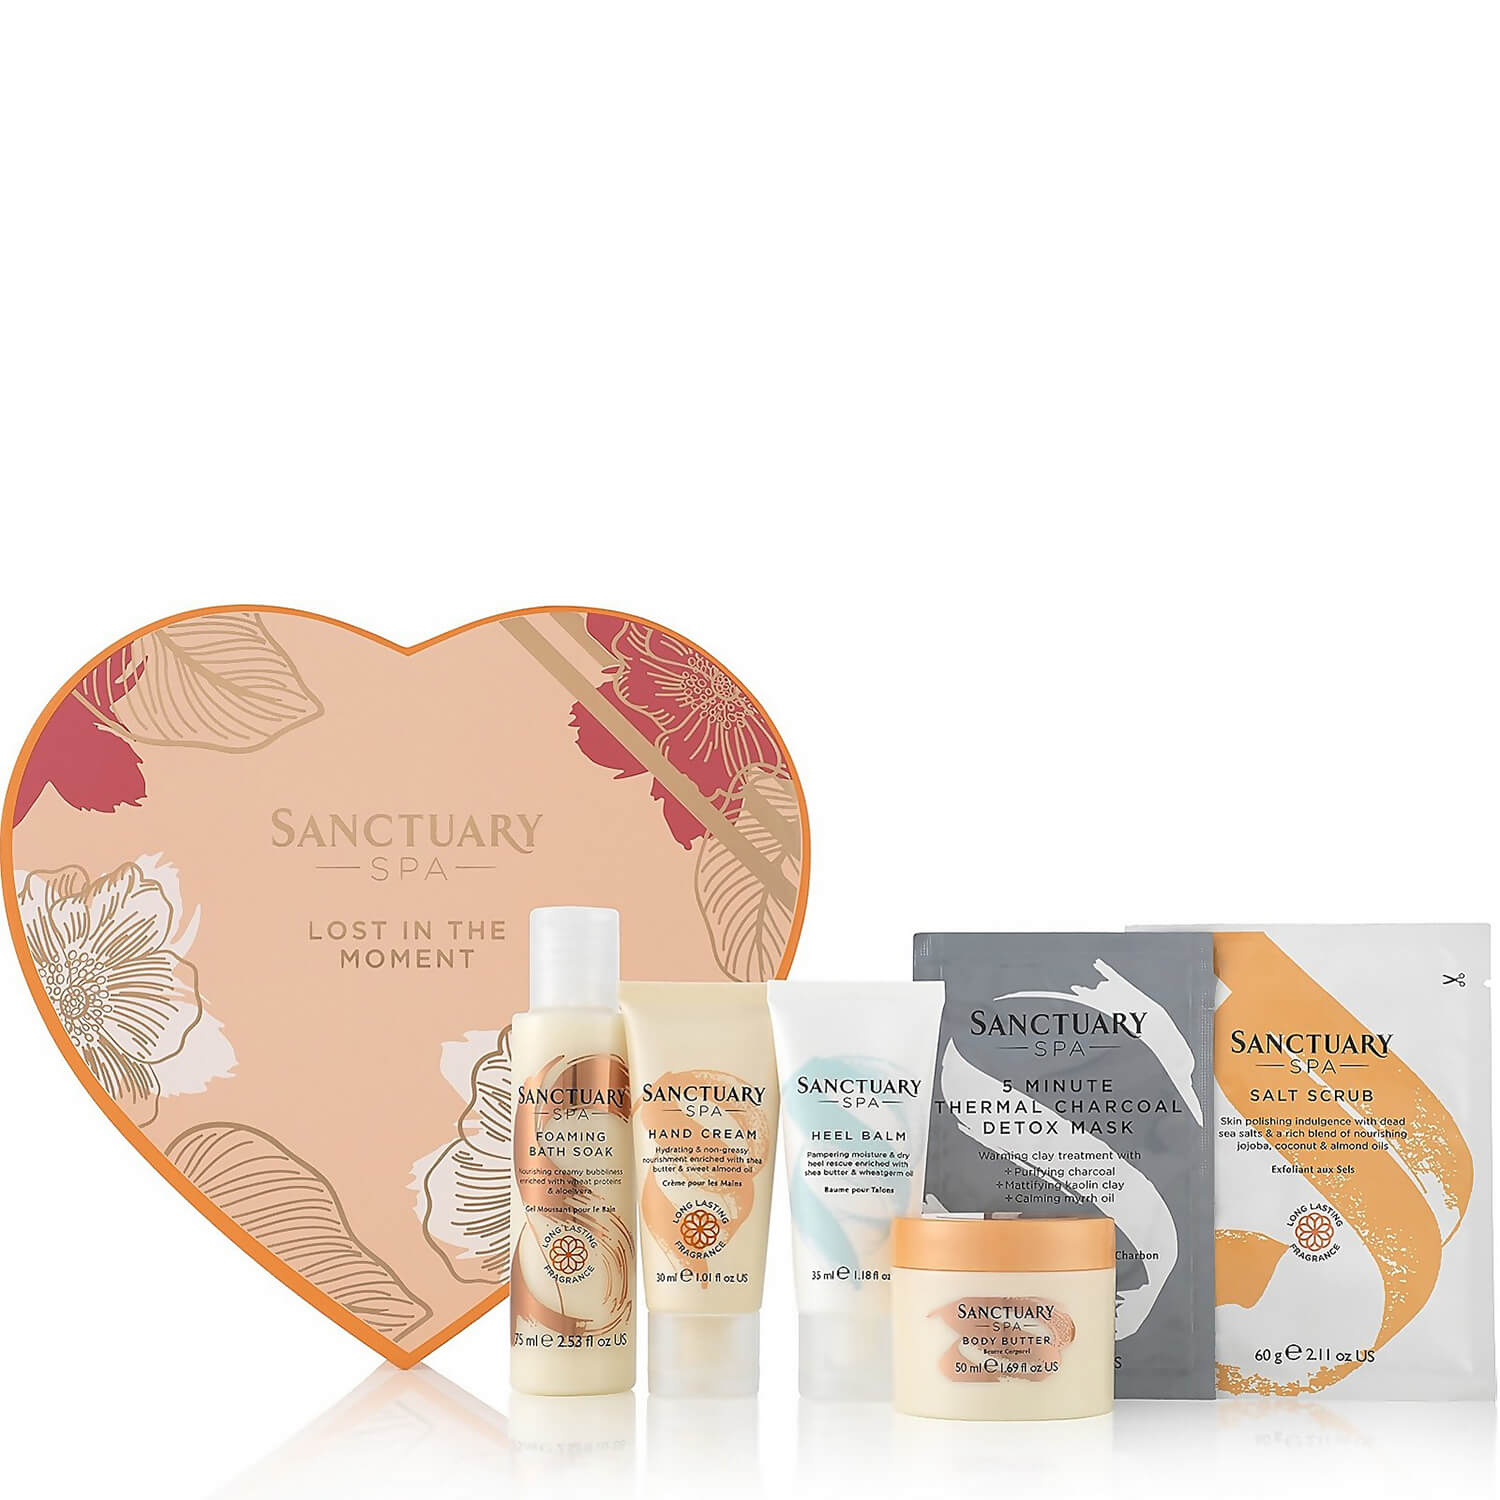 Sanctuary Lost in the Moment Giftset 1 Shaws Department Stores